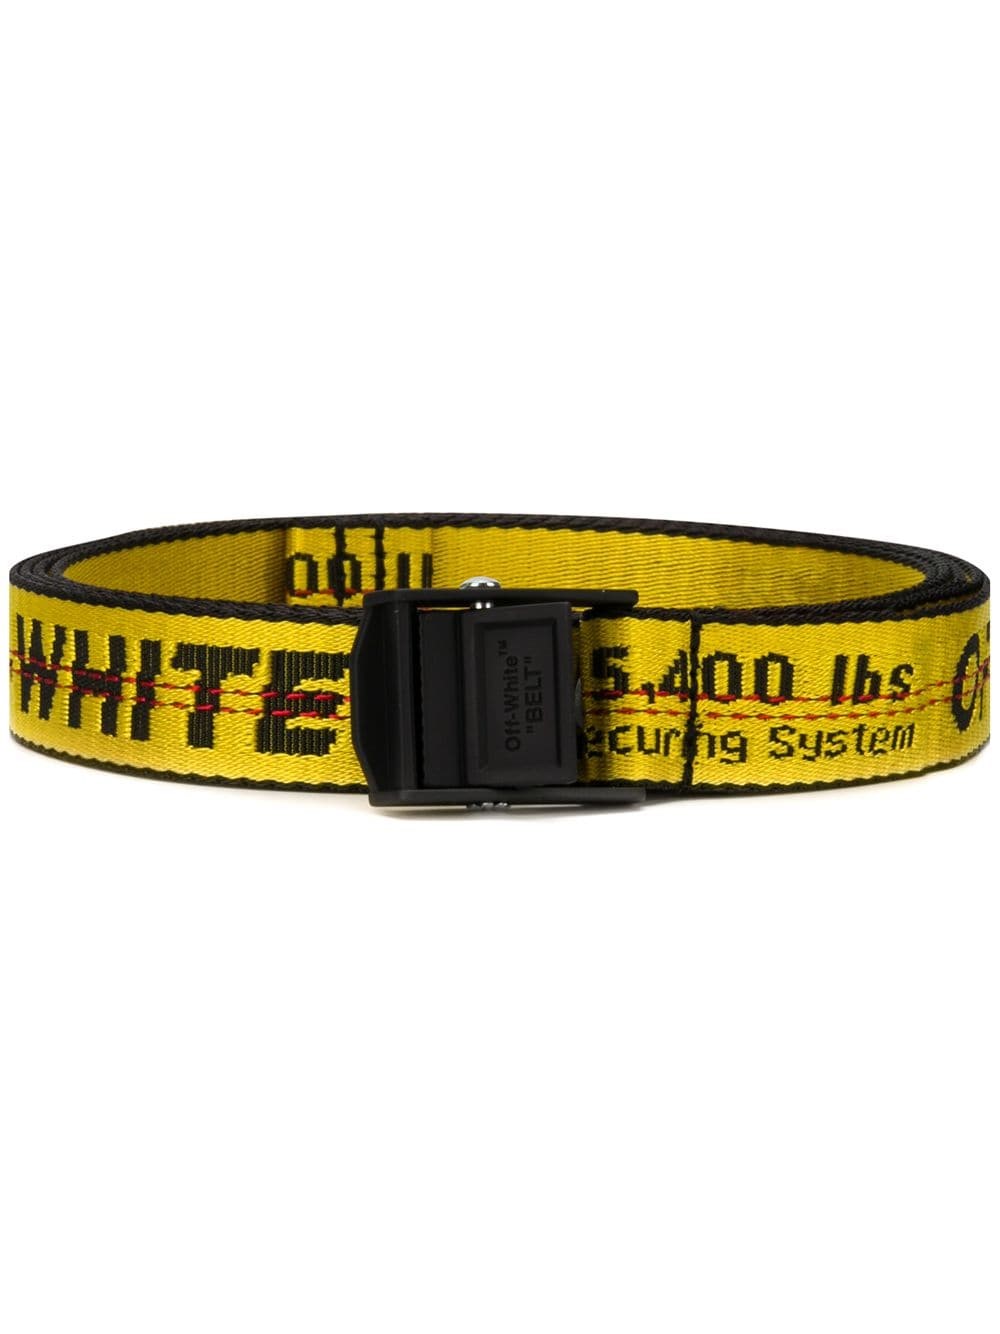 off-white MINI INDUSTRIAL BELT available on www.bagsaleusa.com - 32401